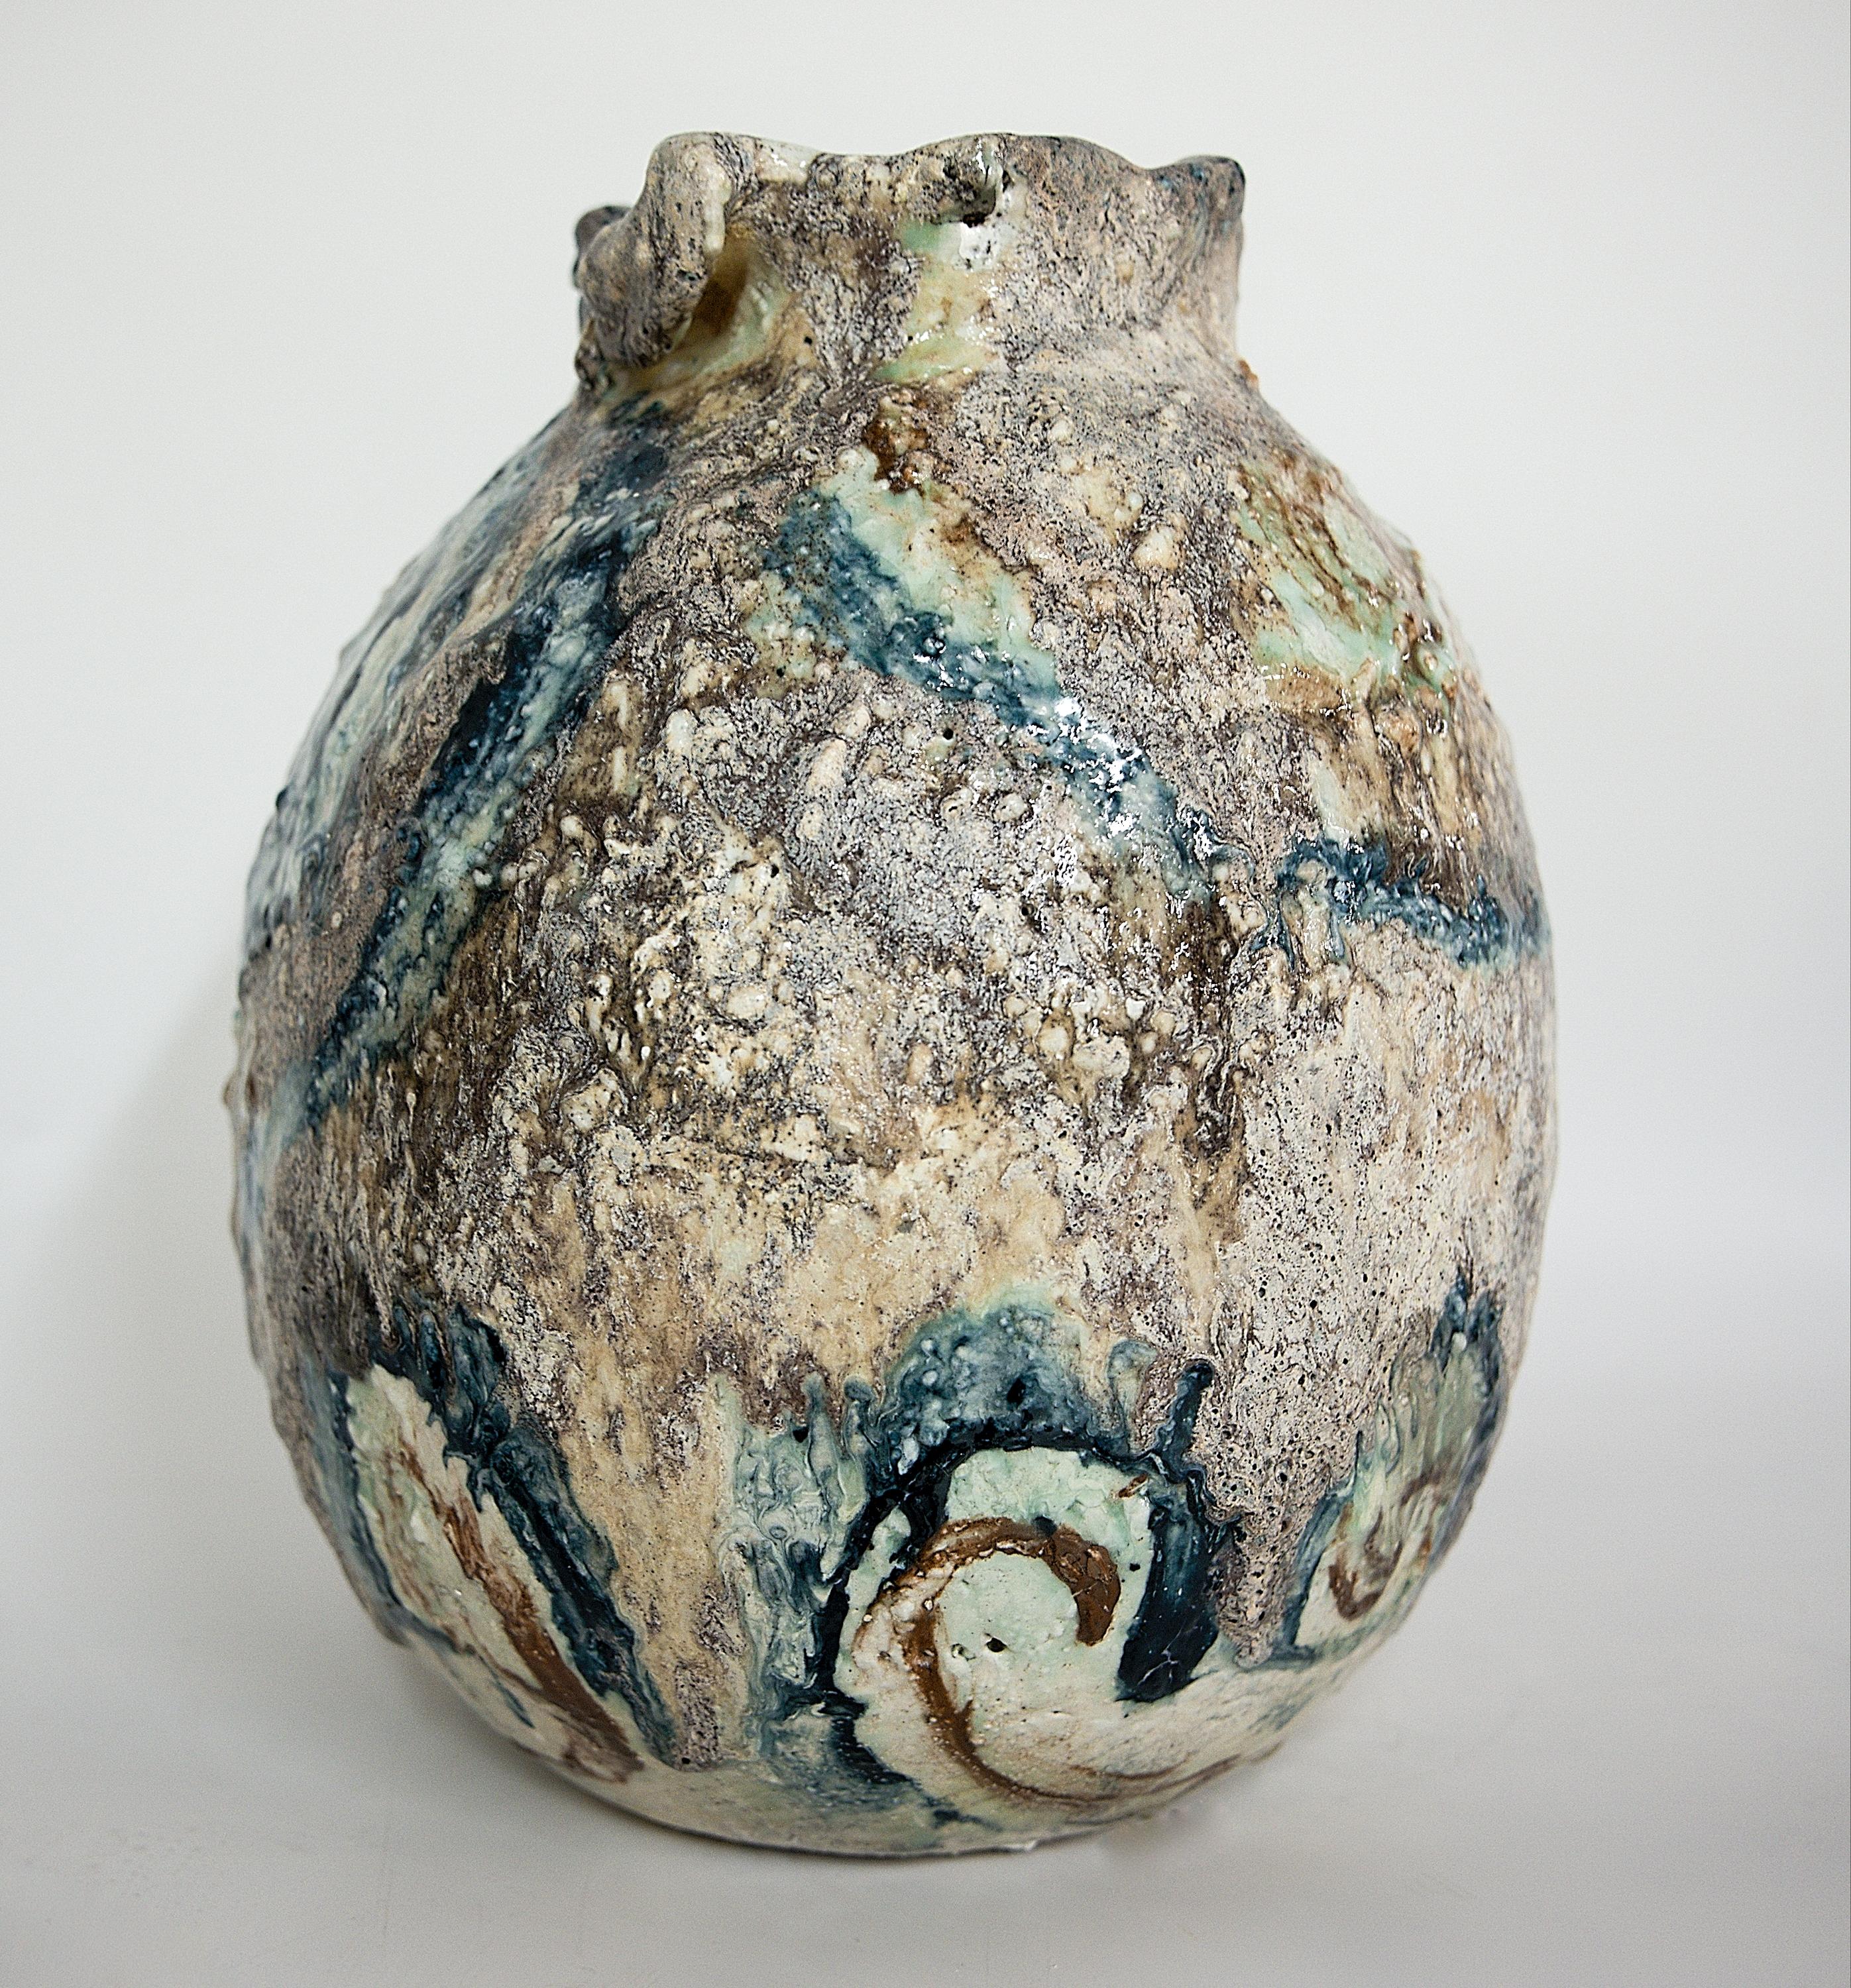 Art Series
Flowing waterfall.. water color series 

Large  Oval Moon Vase approx 14.5 inches tall x 13.6 inches wide
Heavy: 26 lbs
a mix of traditional with organic modern this Large Moon jar  shape with texture and many layers of custom glazes.